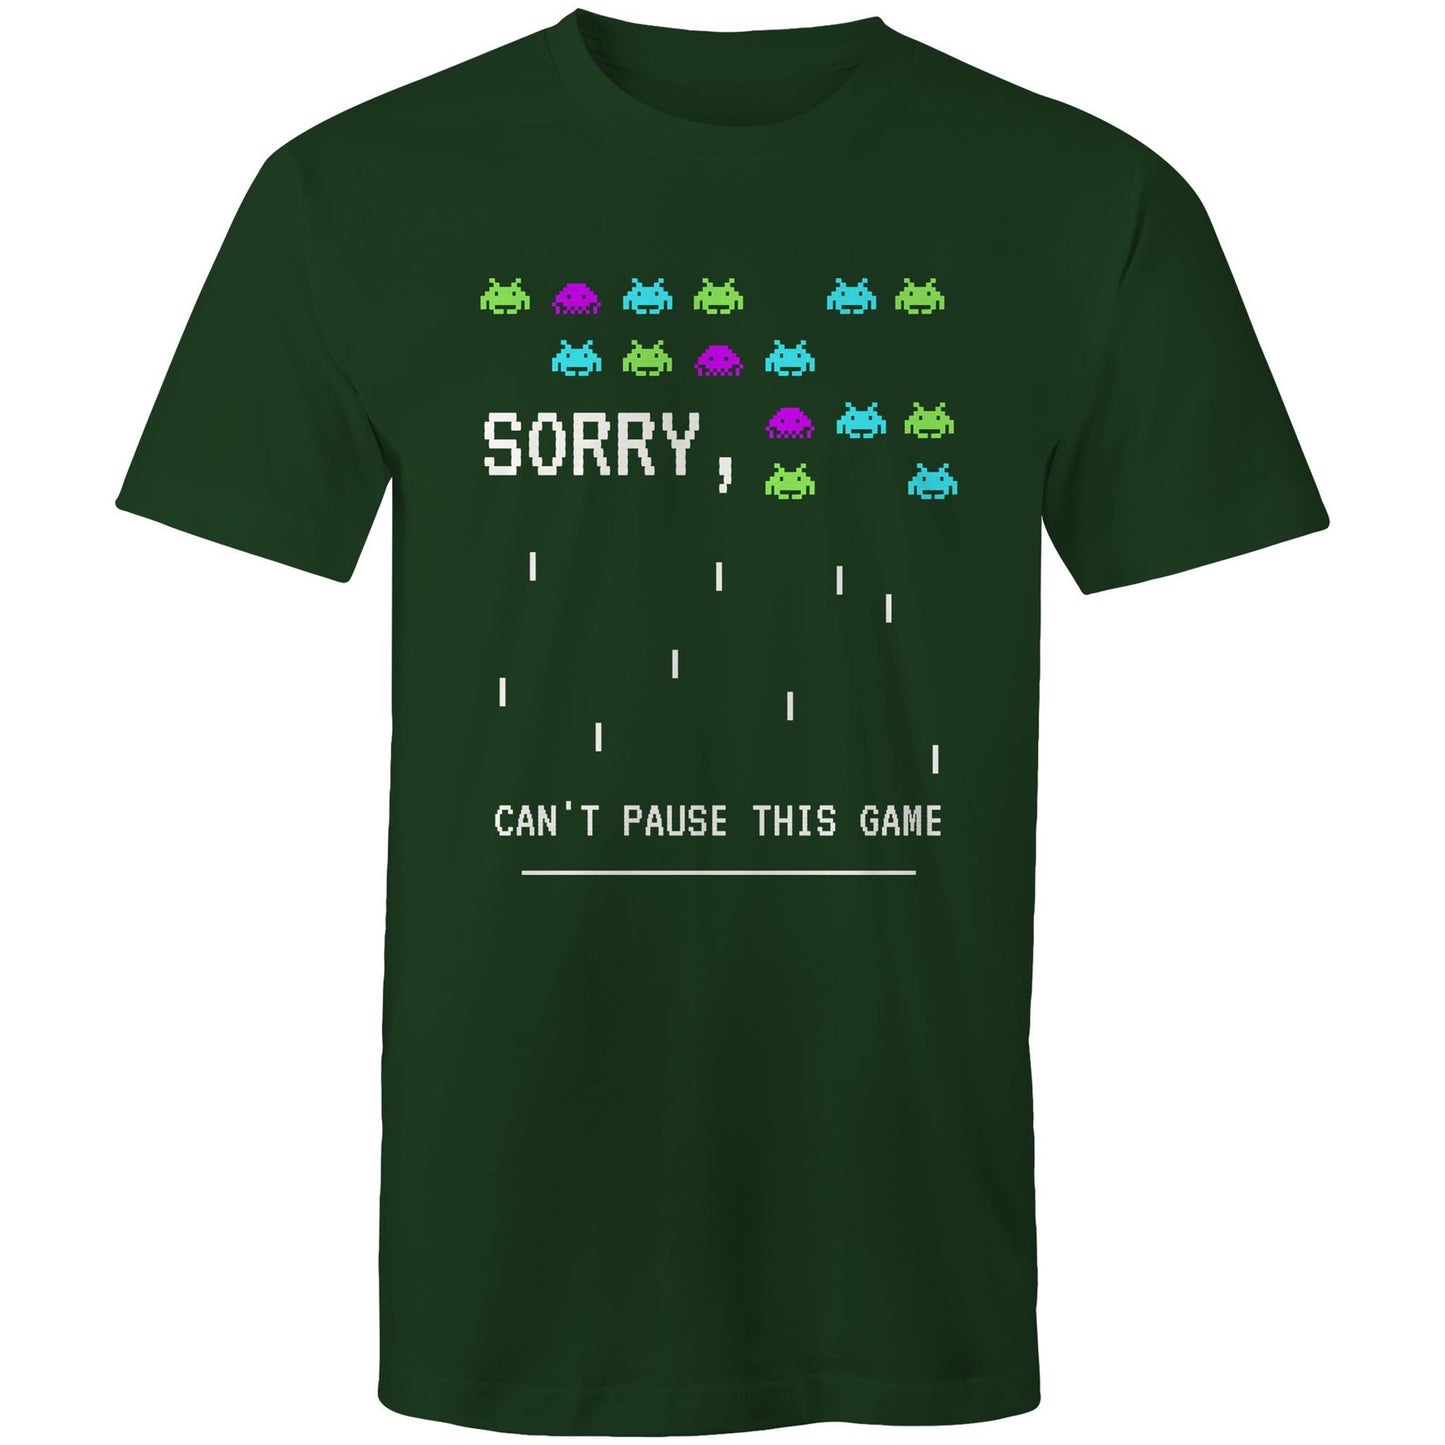 Sorry, Can't Pause This Game - Mens T-Shirt Forest Green Mens T-shirt Games